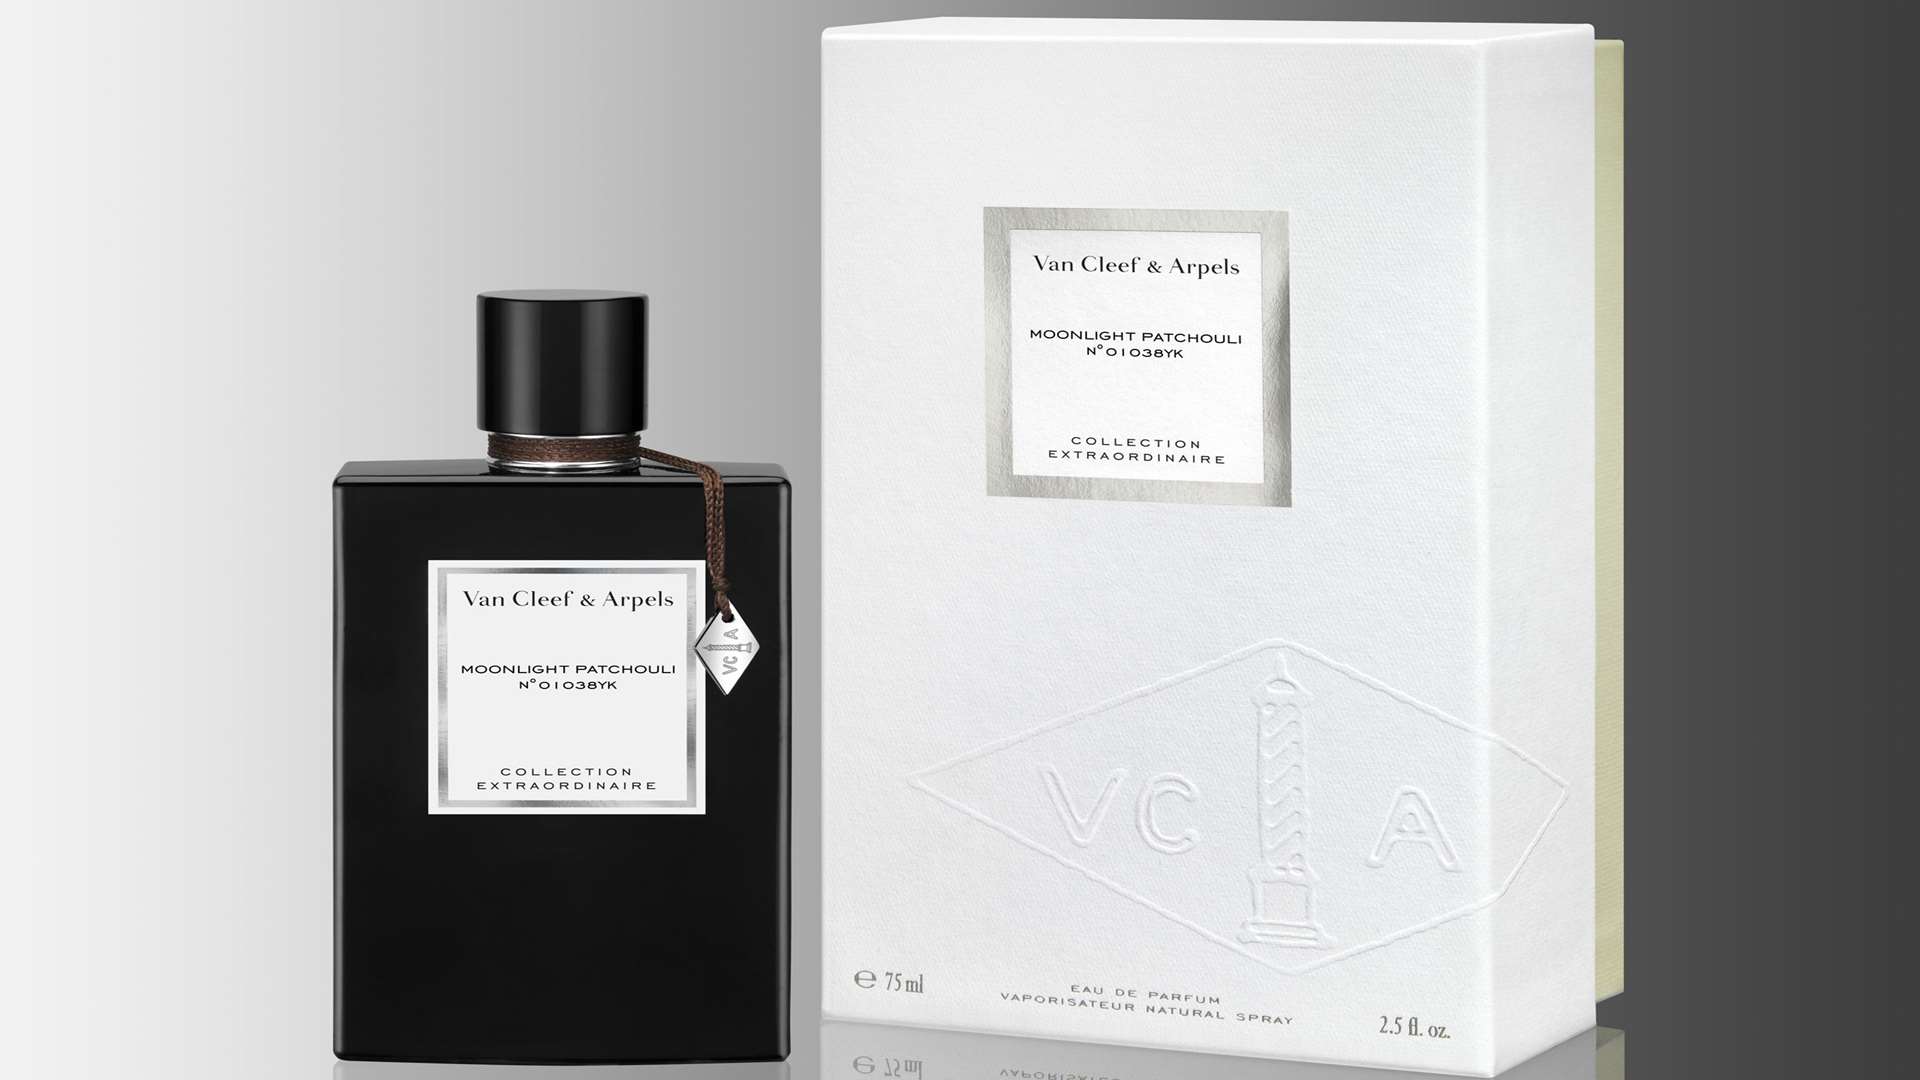 If you really want to push the boast out, Van Cleef and Arpels' suede-infused fragrance Moonlight Patchouli is as warm and enveloping as a bear hug. It costs £126 for 75ml at www.harrods.com